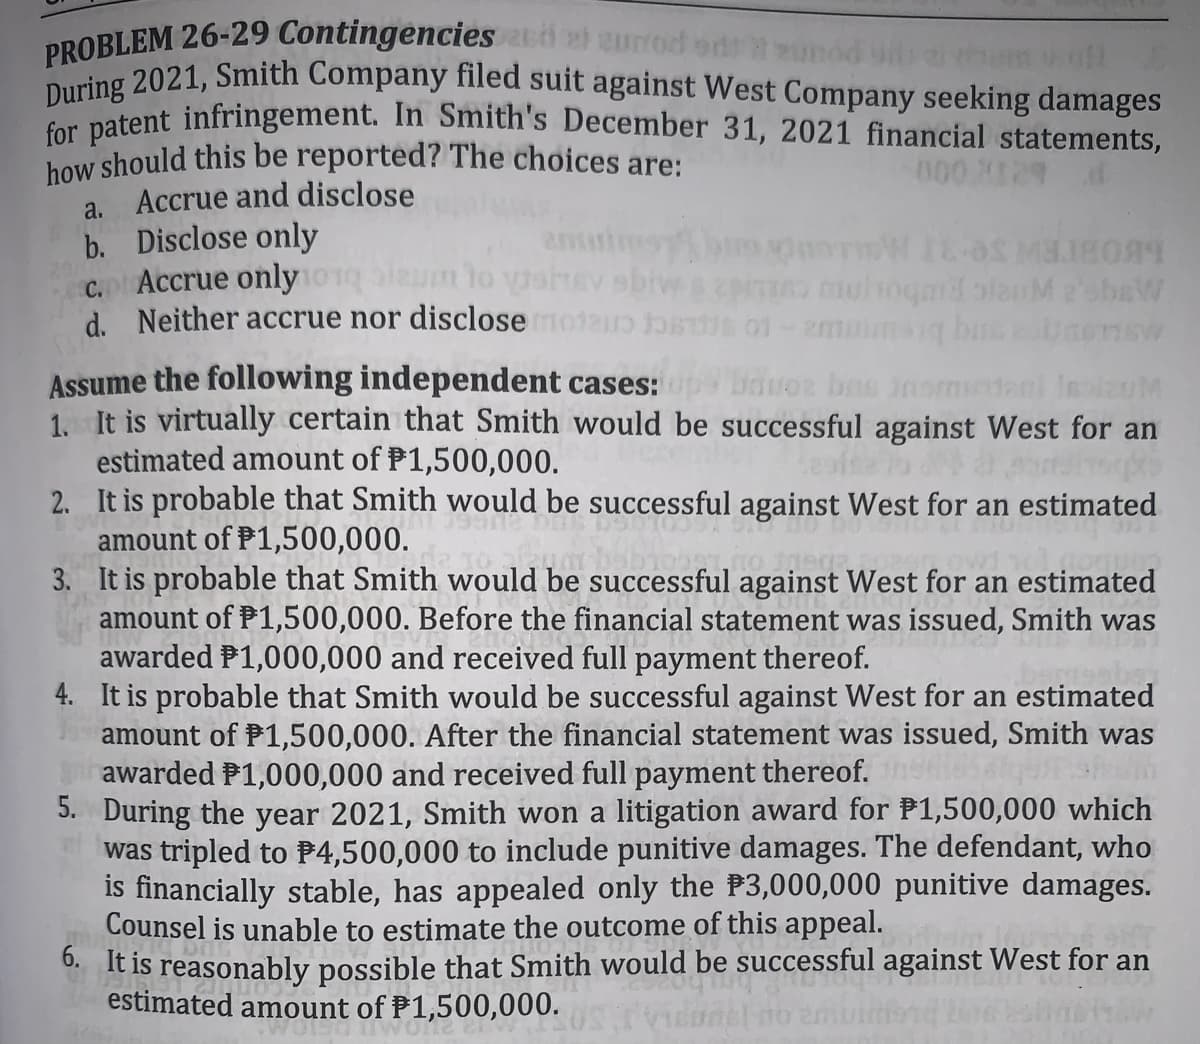 PROBLEM 26-29 Contingencies a eurrod ed
how should this be reported? The choices are:
During 2021, Smith Company filed suit against West Company seeking damages
for patent infringement. In Smith's December 31, 2021 financial statements,
000 X129
Accrue and disclose
b. Disclose only
C. Accrue only
d. Neither accrue nor disclose moteo D o1
a.
enuines
EV sbive
pio uoqm olanM 2shaW
LBOBIEW Se 3I MOLA
Assume the following independent cases: bauoa bas
1. It is virtually certain that Smith would be successful against West for an
estimated amount of P1,500,000.
2. It is probable that Smith would be successful against West for an estimated
amount of P1,500,000.
3. It is probable that Smith would be successful against West for an estimated
amount of P1,500,000. Before the financial statement was issued, Smith was
awarded P1,000,000 and received full payment thereof.
4. It is probable that Smith would be successful against West for an estimated
amount of P1,500,000. After the financial statement was issued, Smith was
awarded P1,000,000 and received full payment thereof.
5. During the year 2021, Smith won a litigation award for P1,500,000 which
was tripled to P4,500,000 to include punitive damages. The defendant, who
is financially stable, has appealed only the P3,000,000 punitive damages.
Counsel is unable to estimate the outcome of this appeal.
0 It is reasonably possible that Smith would be successful against West for an
estimated amount of P1,500,000.
IlauM
WOLS
